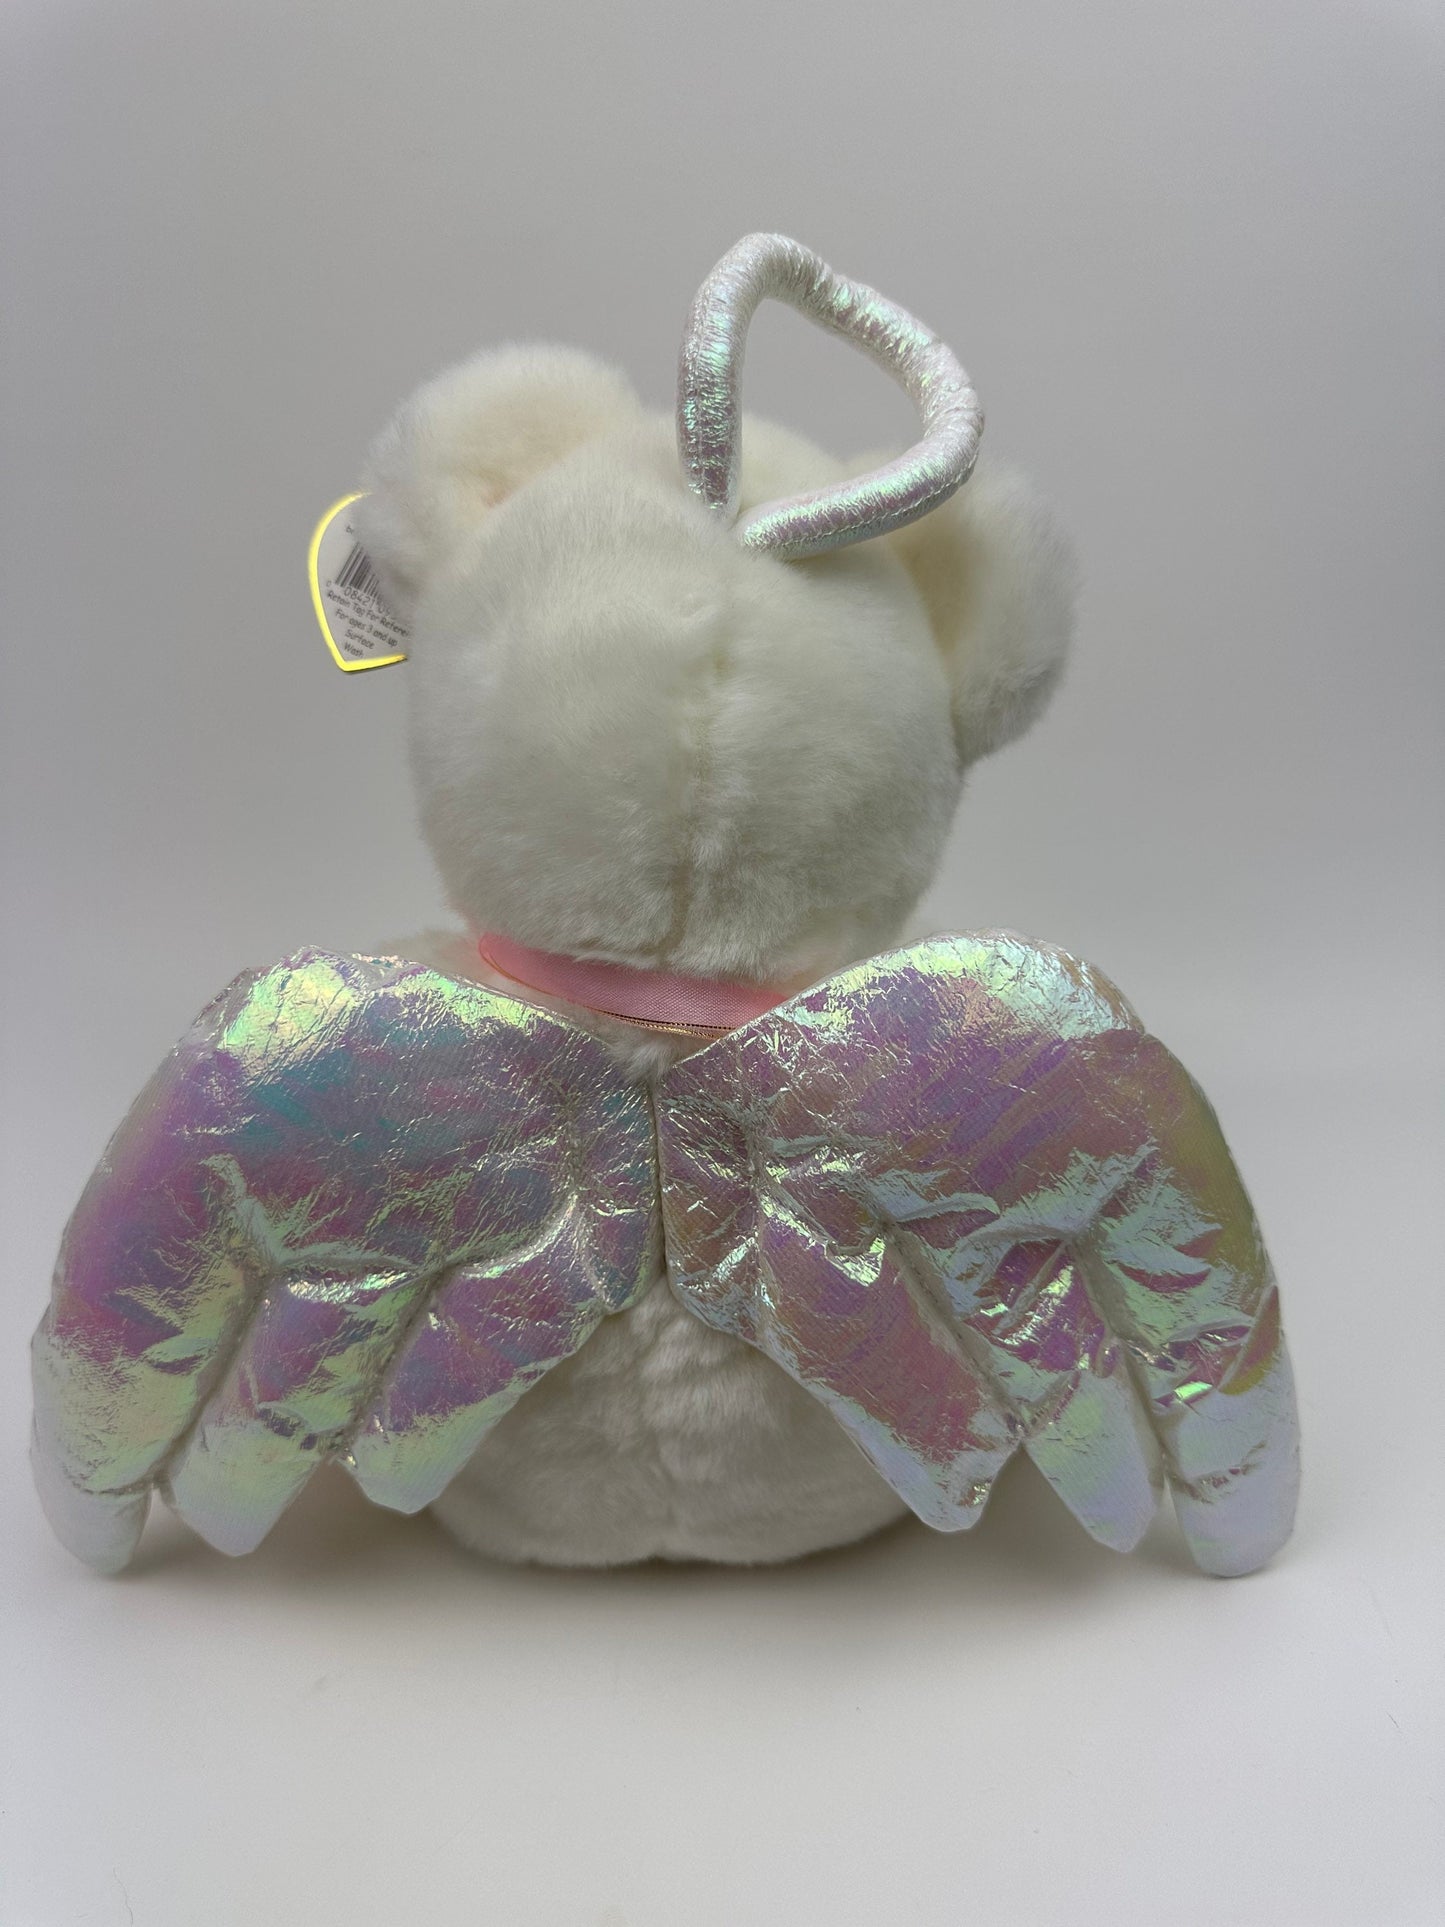 Ty Beanie Buddy “Halo” the Angel Bear with Iridescent wings (14.5 inch)